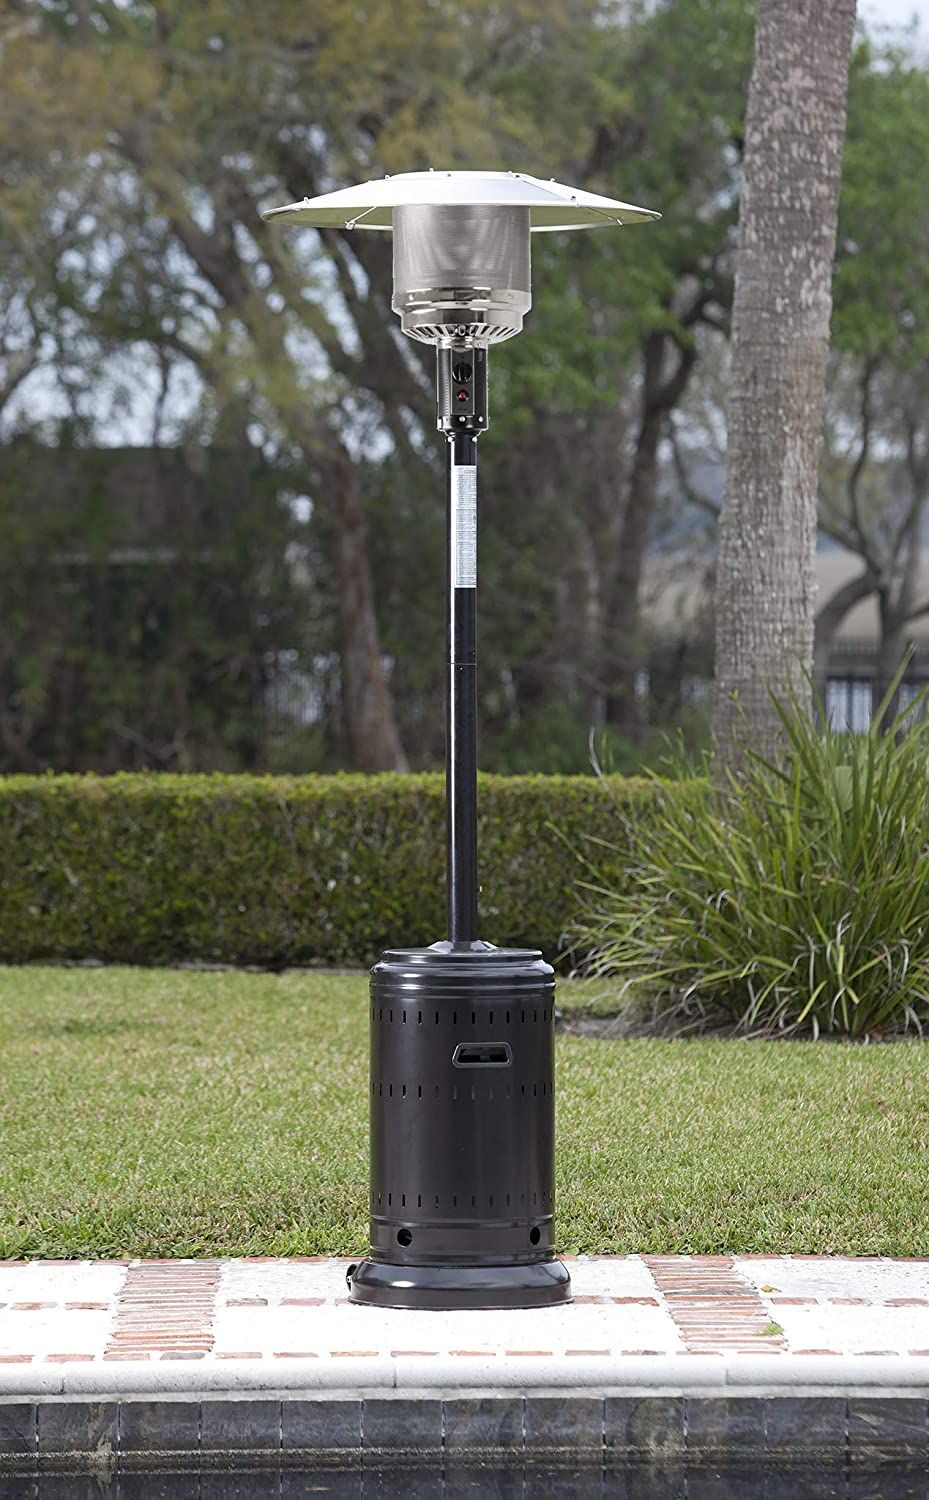 AmazonBasics Outdoor Patio Heater with Wheels, Propane 46,000 BTU, Commercial &amp; Residential 